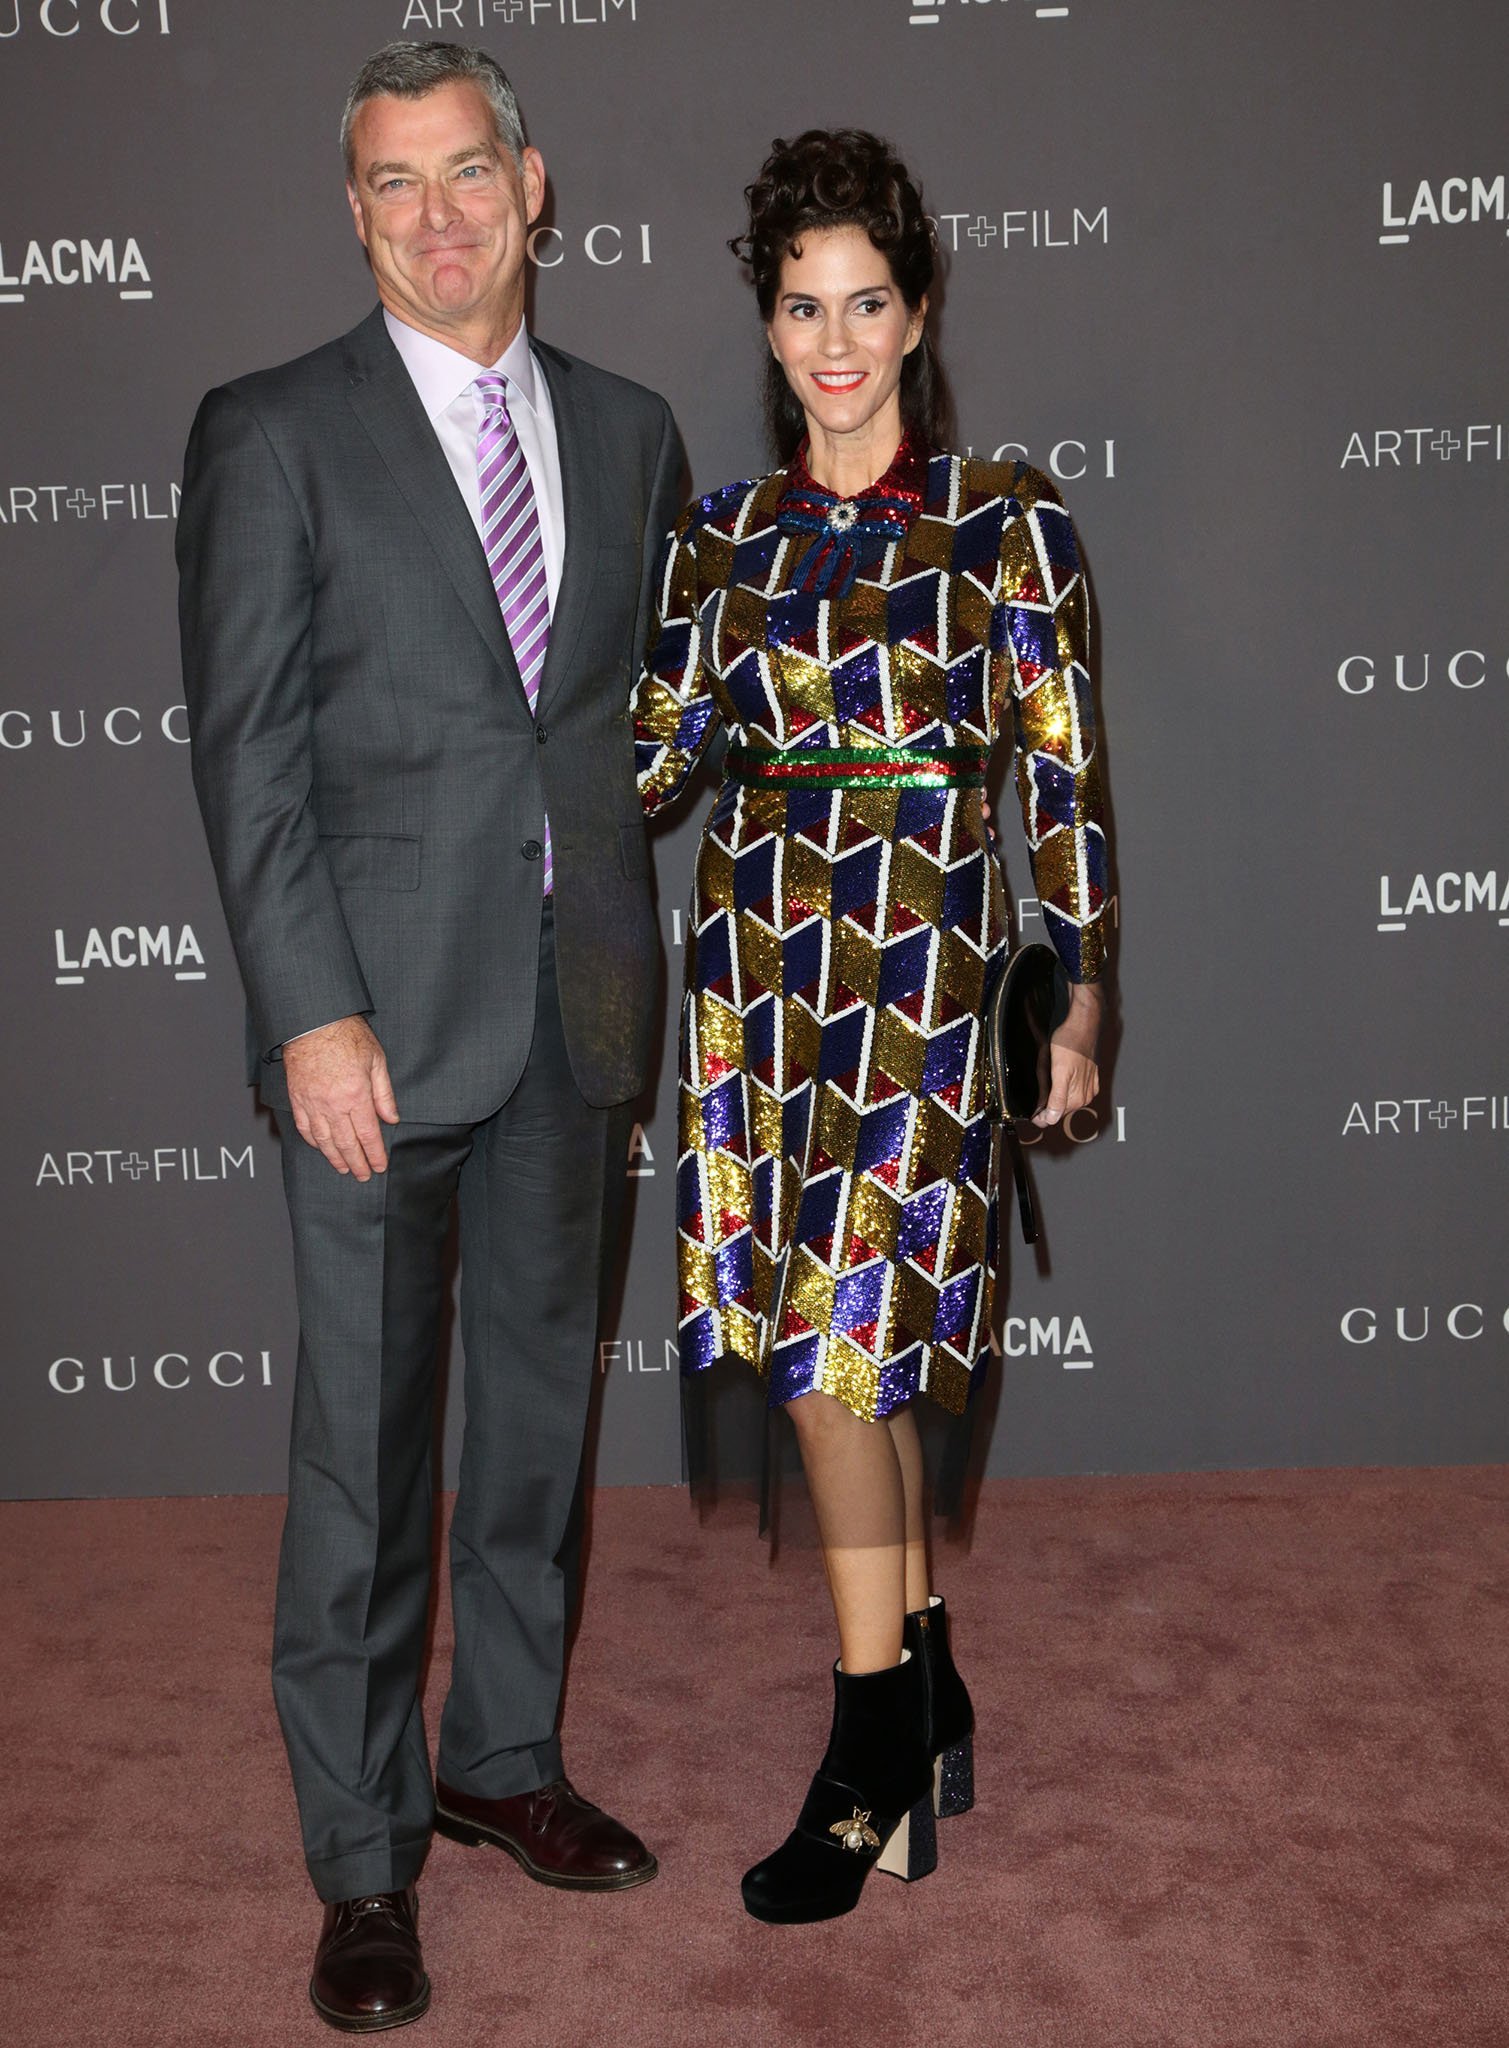 While she's not an A-list actress, the majority of Jami Gertz's net worth comes from her marriage with her business tycoon husband Tony Ressler, co-founder of Ares Management